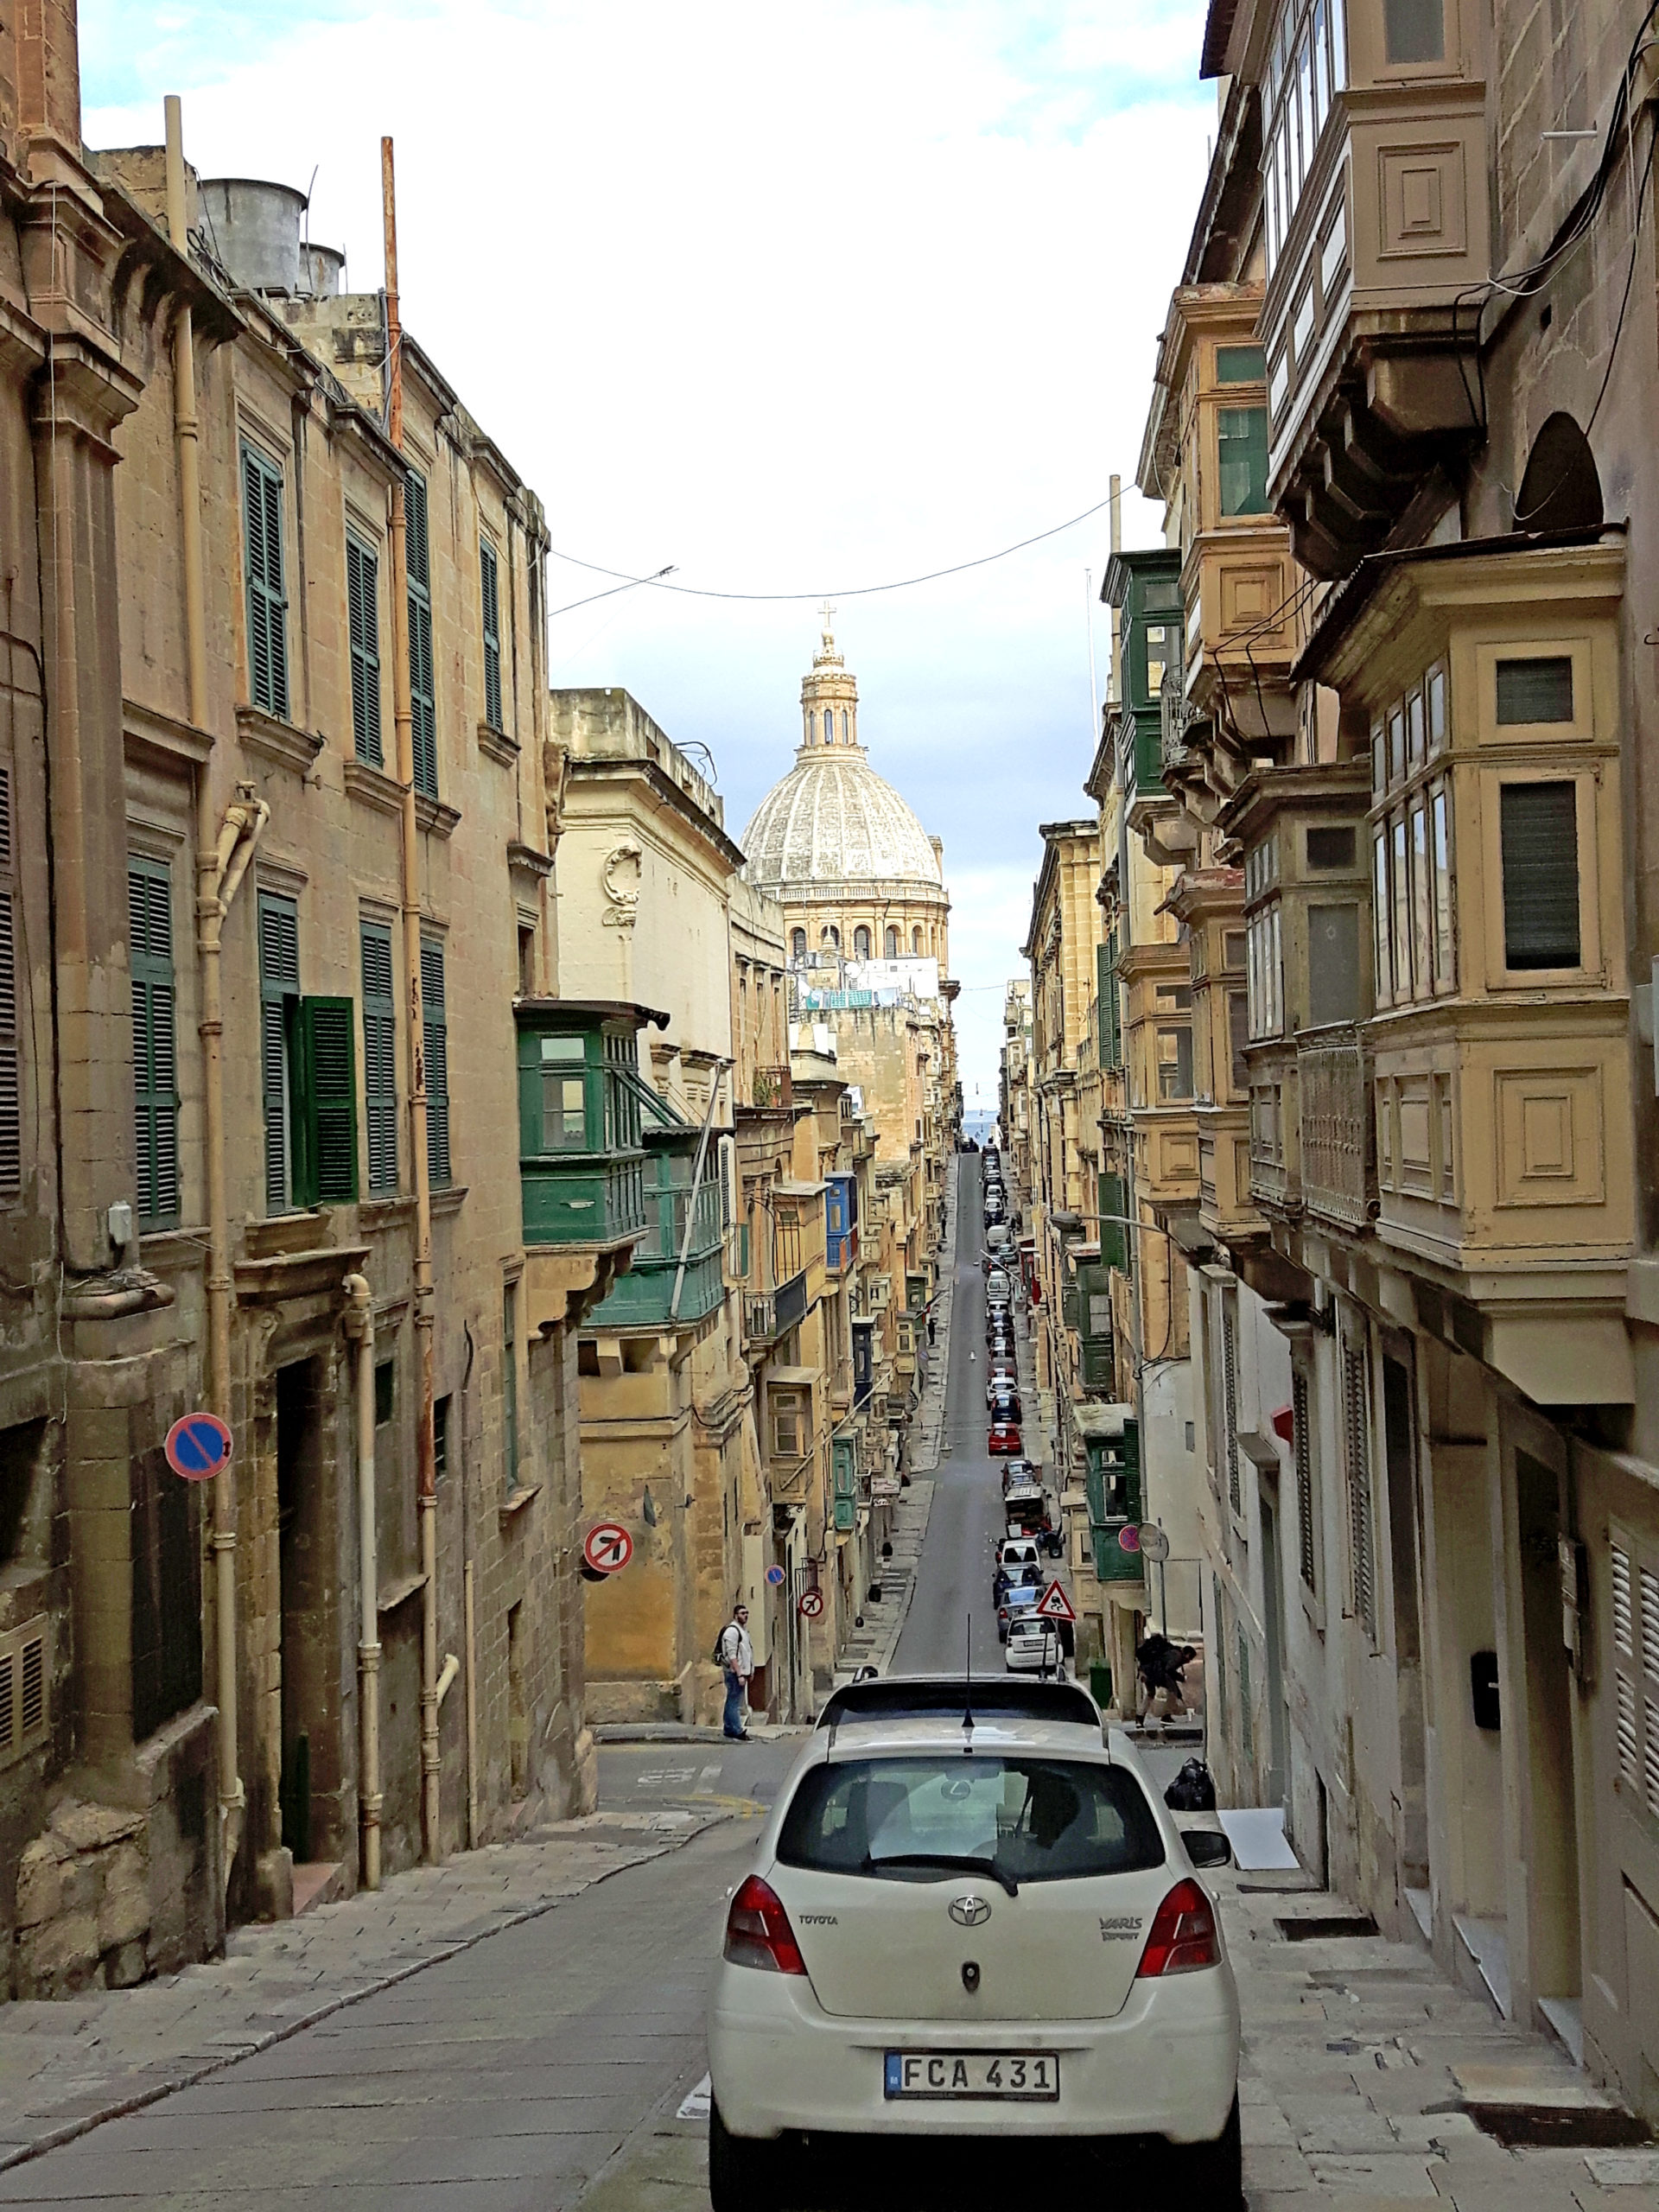 Cities And Villages To Visit In Malta